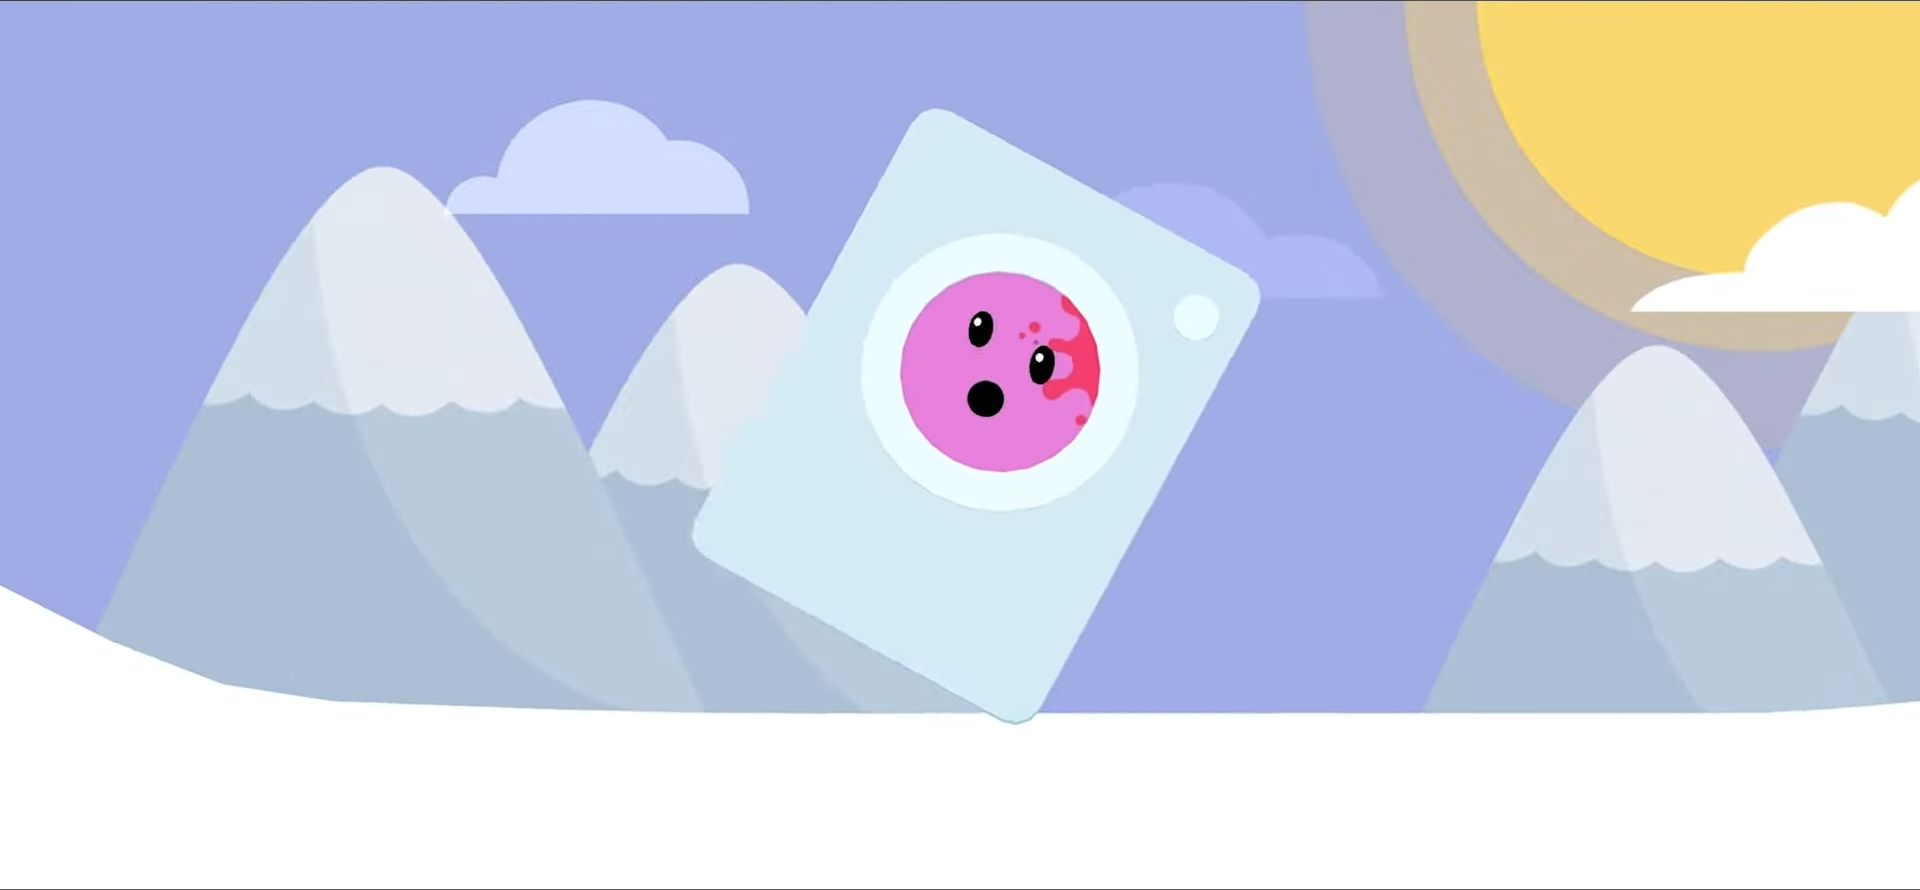 Dumb Ways to Die 4 - Android game screenshots.